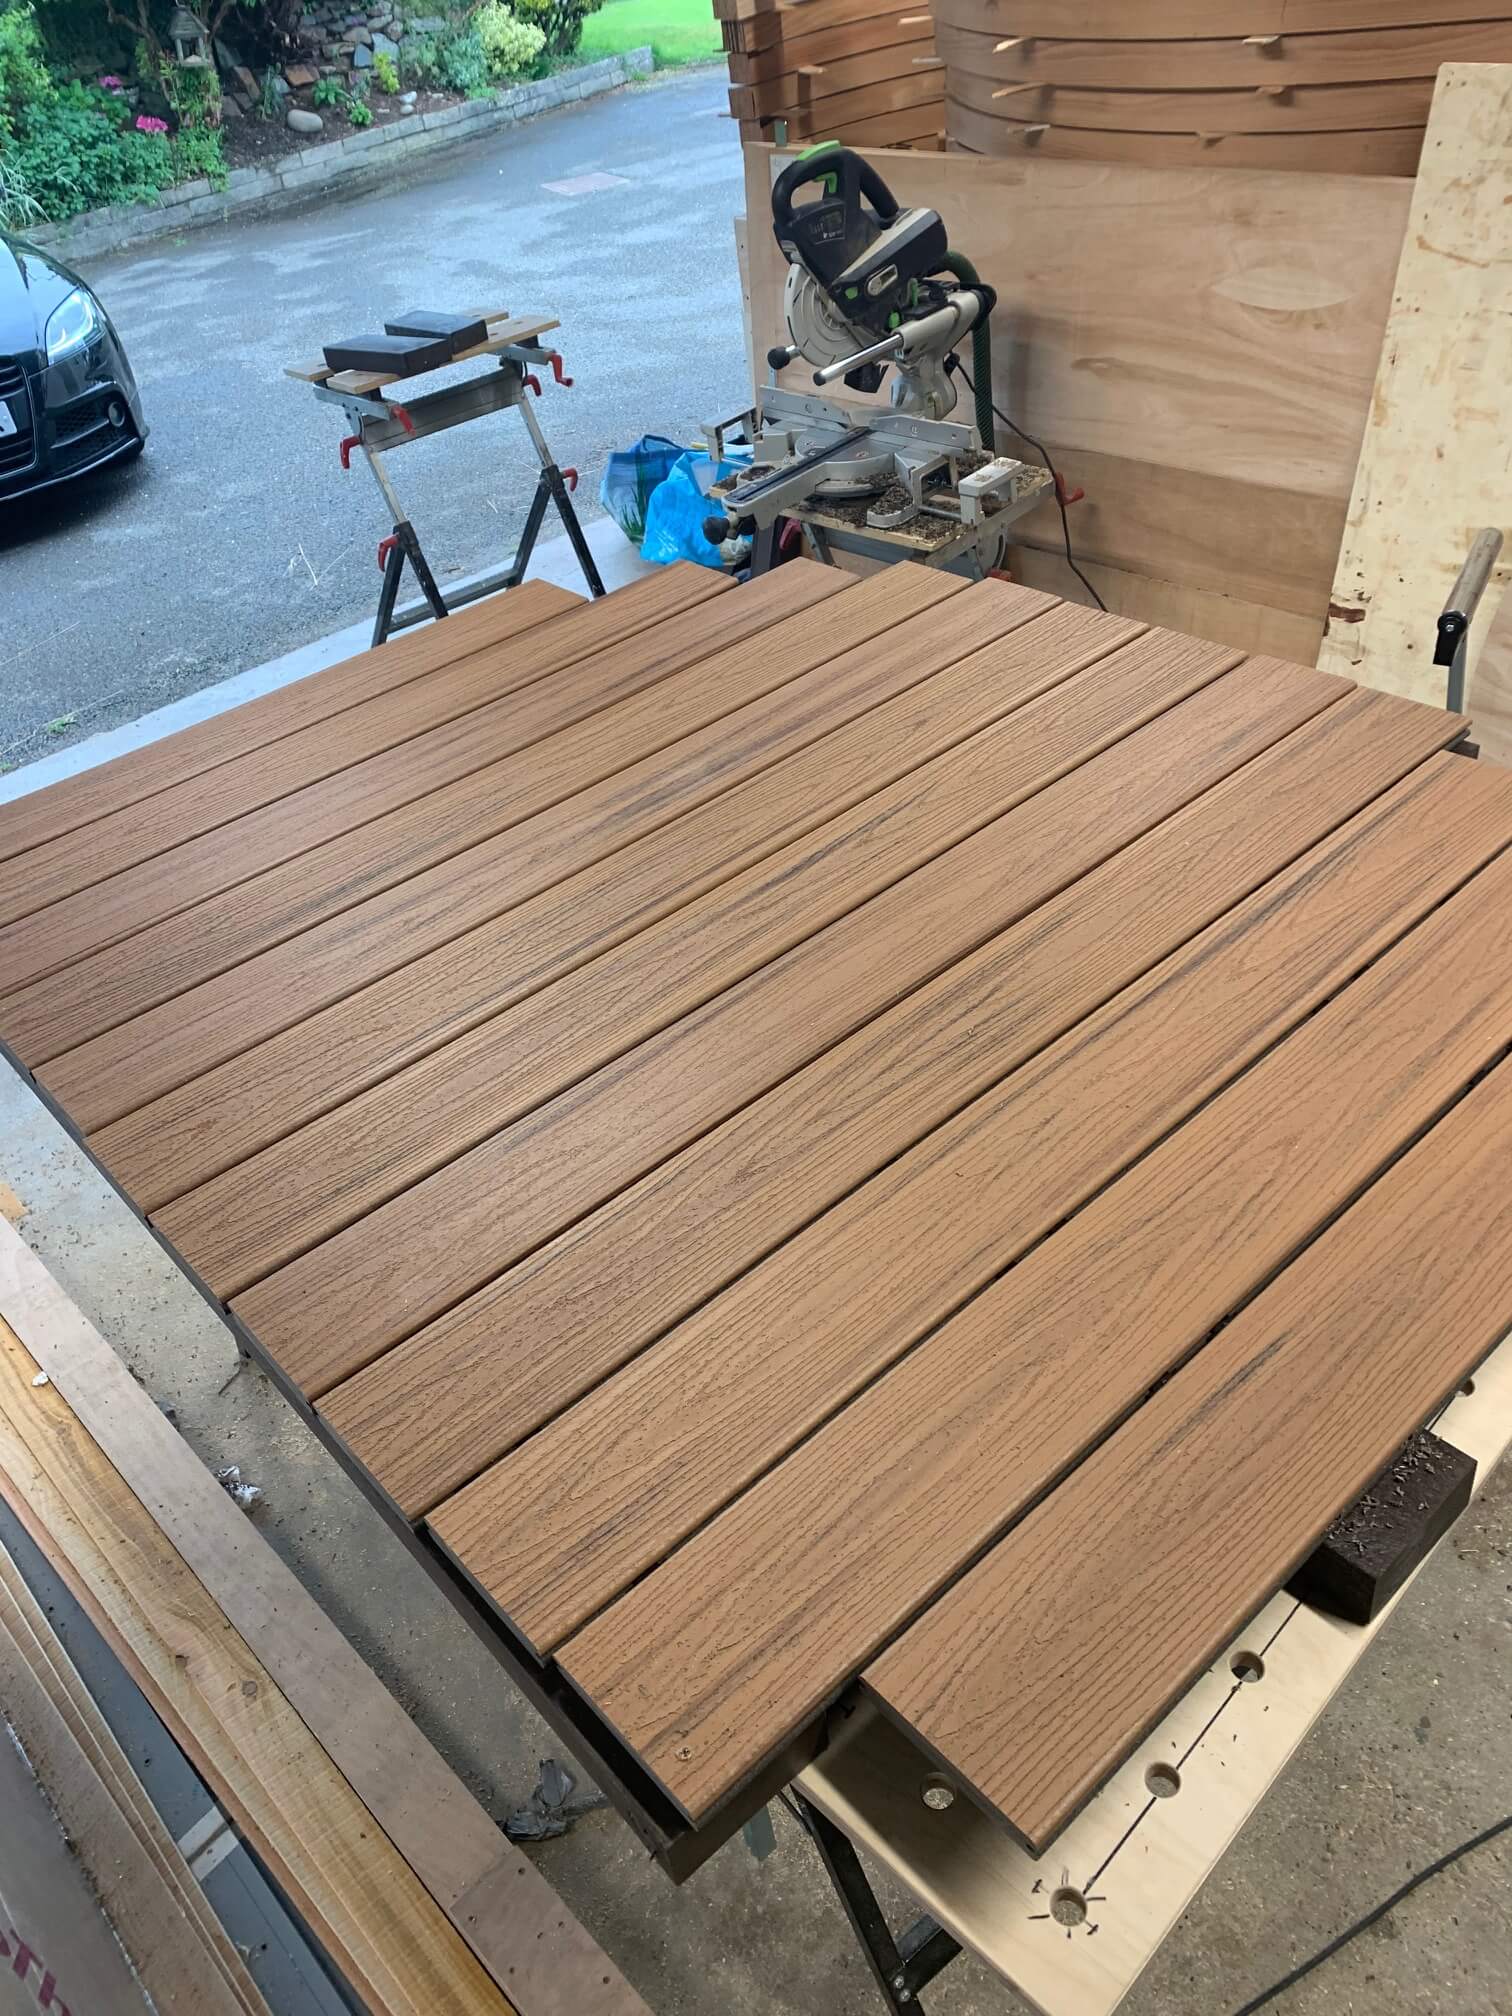 Decking Boards In Place